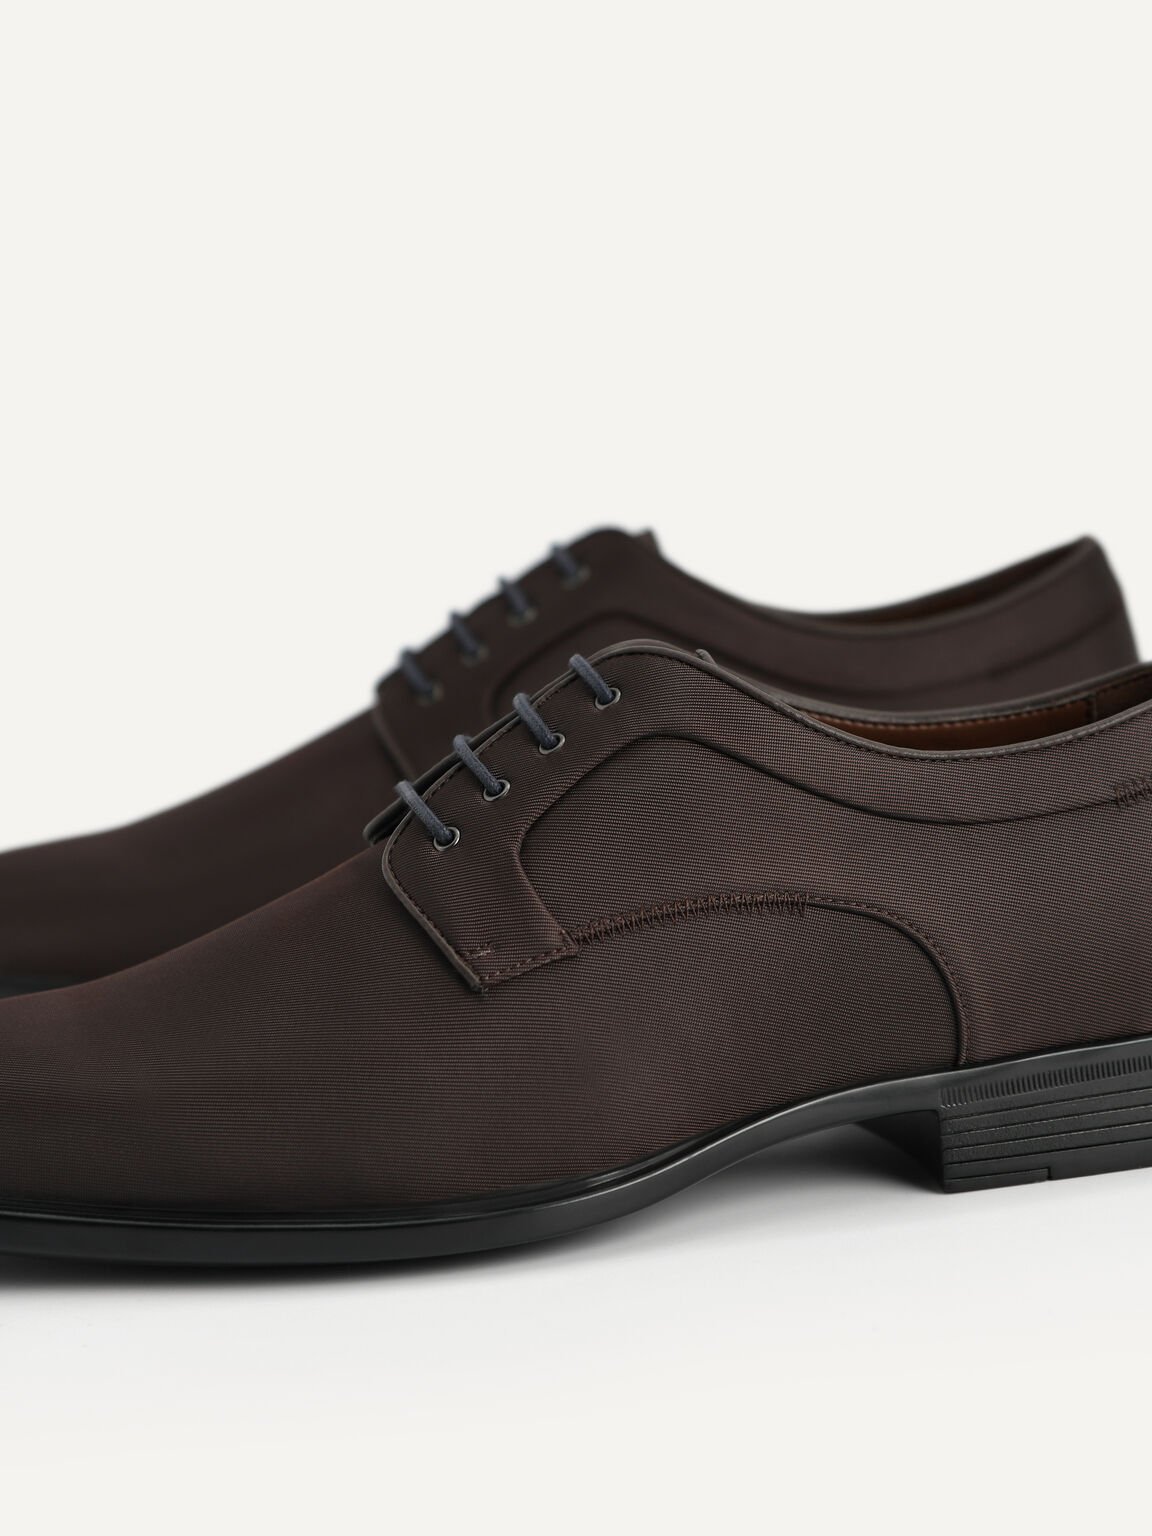 Pointed Square Toe Derby Shoes, Dark Brown